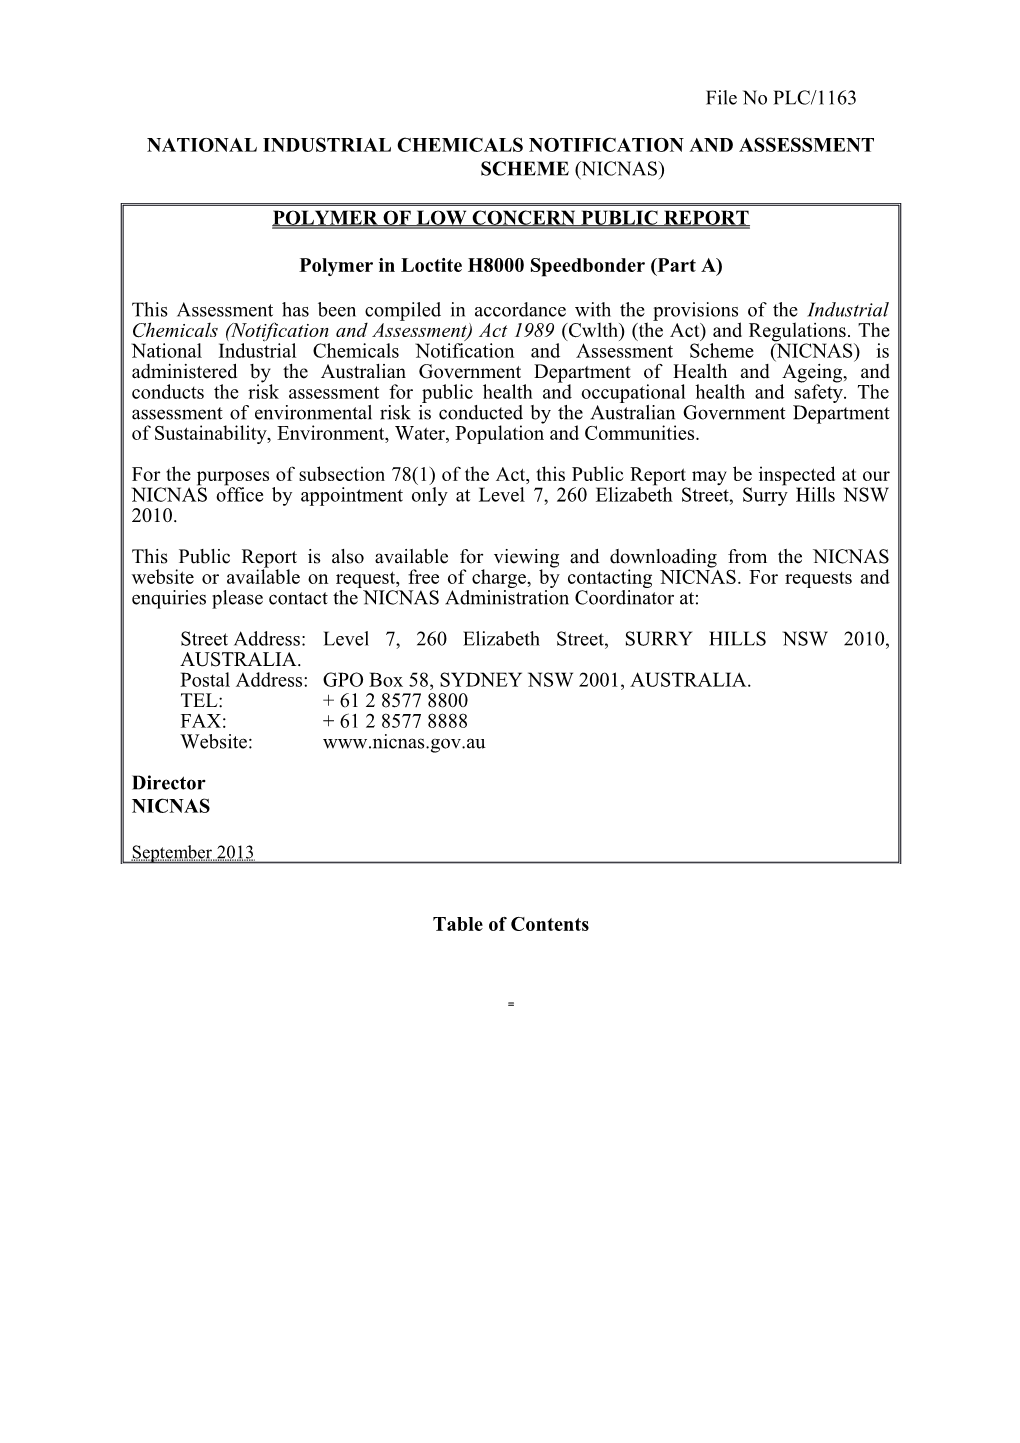 National Industrial Chemicals Notification and Assessment Scheme (Nicnas) s14